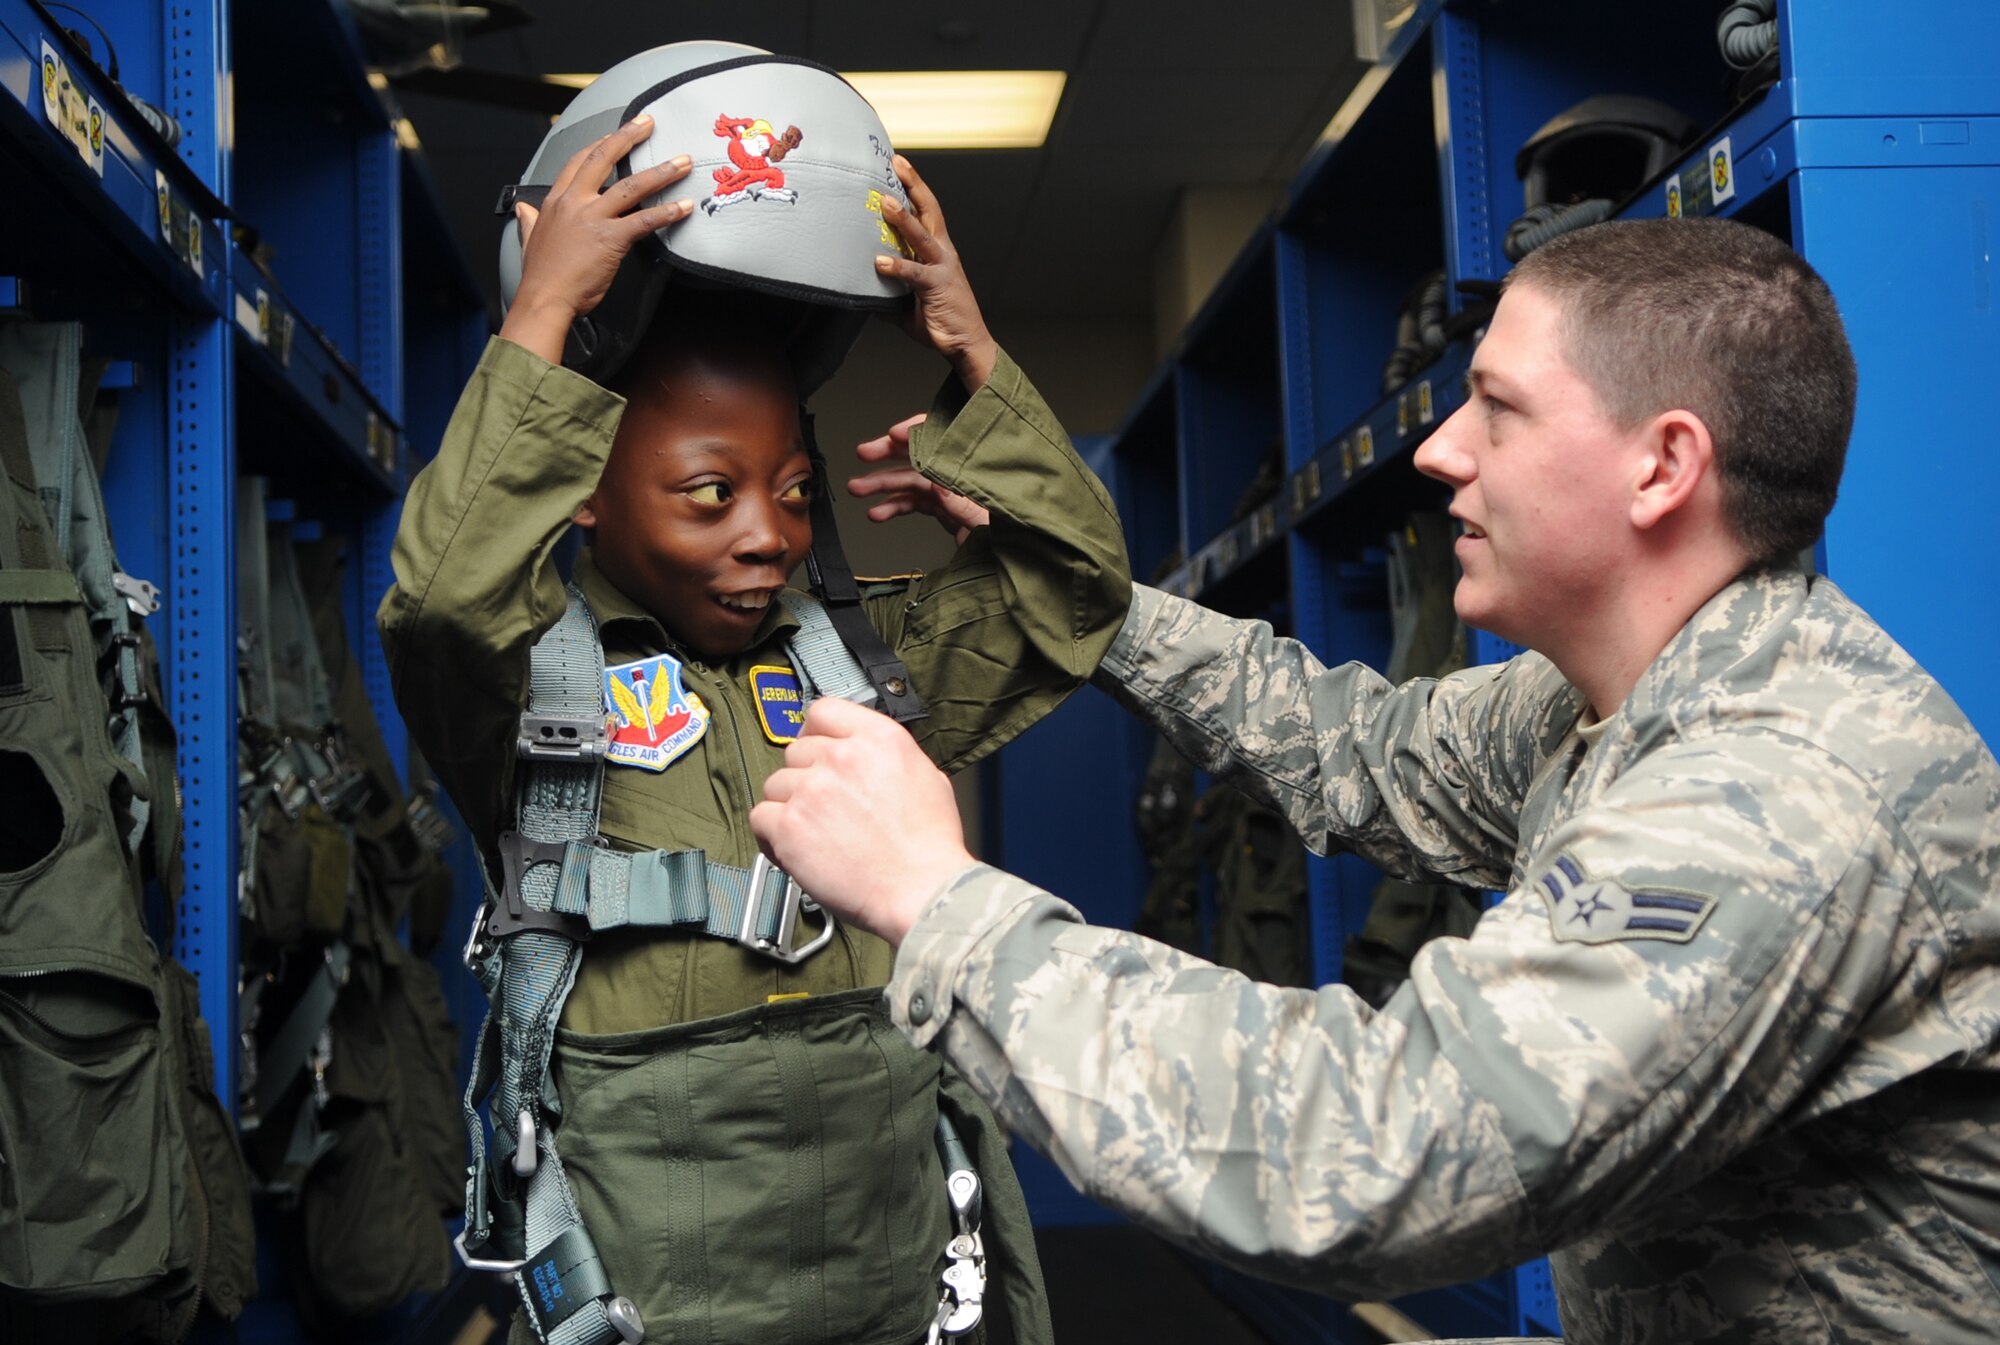 Airman 1st Class Luke Locken, 4th Operations Support Squadron aircrew flight equipment technician, fits Jeremiah Seaberry, 334th Fighter Squadron pilot for a day, with flight gear during a 4th Fighter Wing Pilot for a Day event, April 3, 2015, at Seymour Johnson Air Force Base, North Carolina. PFAD organizers chose the call sign “Swoosh” for Jeremiah as an allusion to his admiration for his favorite basketball player, Lebron James. (U.S. Air Force photo/Senior Airman Ashley J. Thum) 